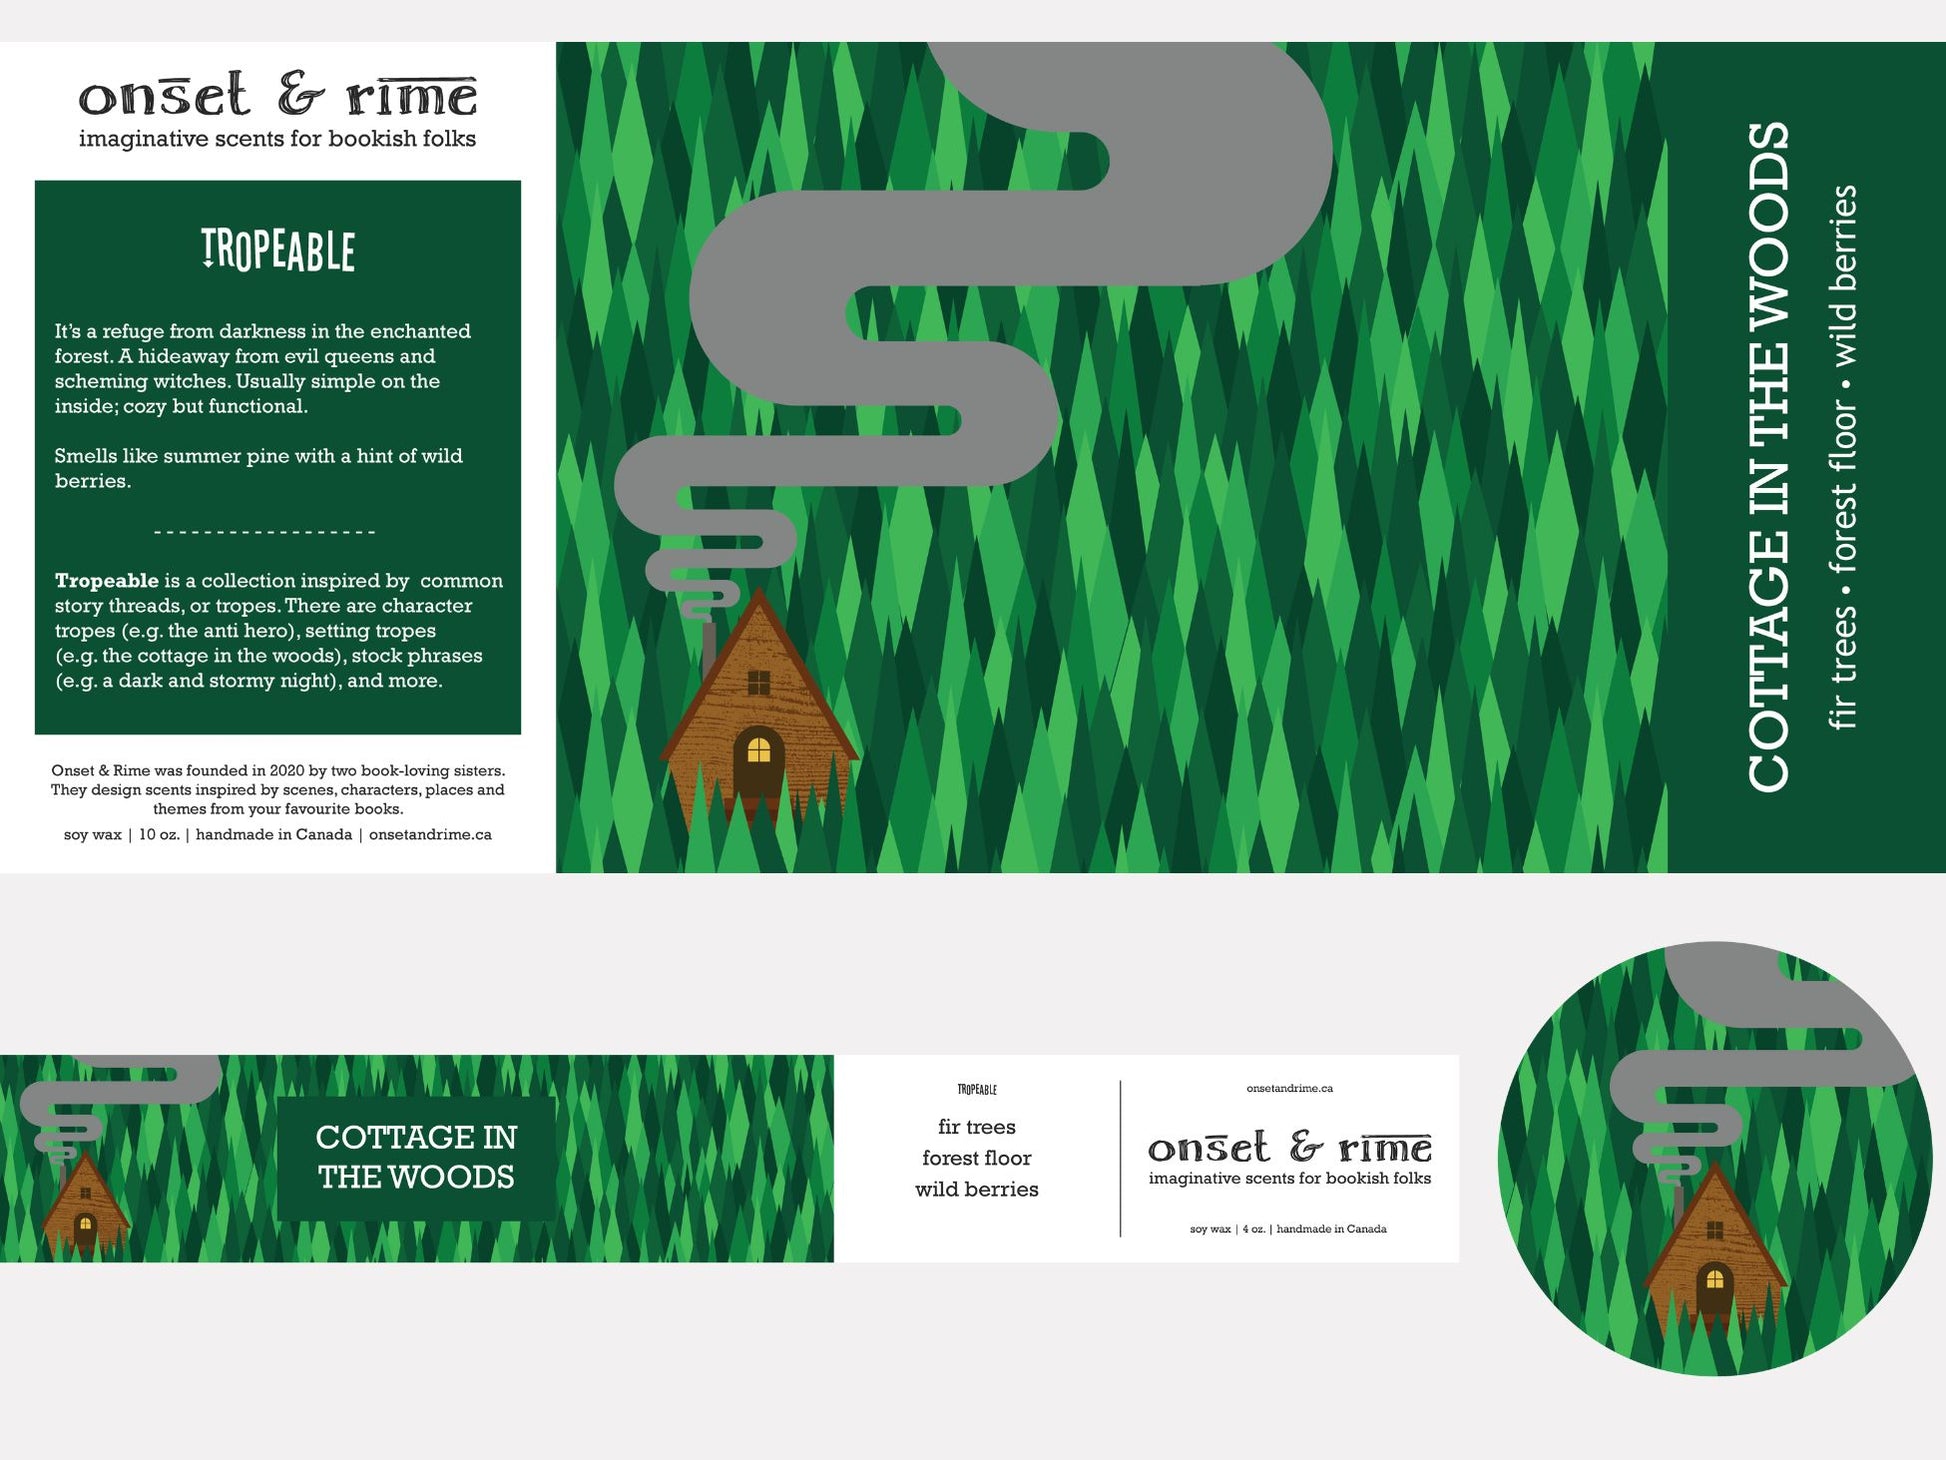 A close up view of the label for the Onset & Rime pine and berries scented candle called "Cottage in the Woods". The label depicts a green pine forest and a small cottage with smoke rising from the chimney. The text on the label is "Cottage in the Woods - Fir Trees, Forest Floor, Wild Berries".